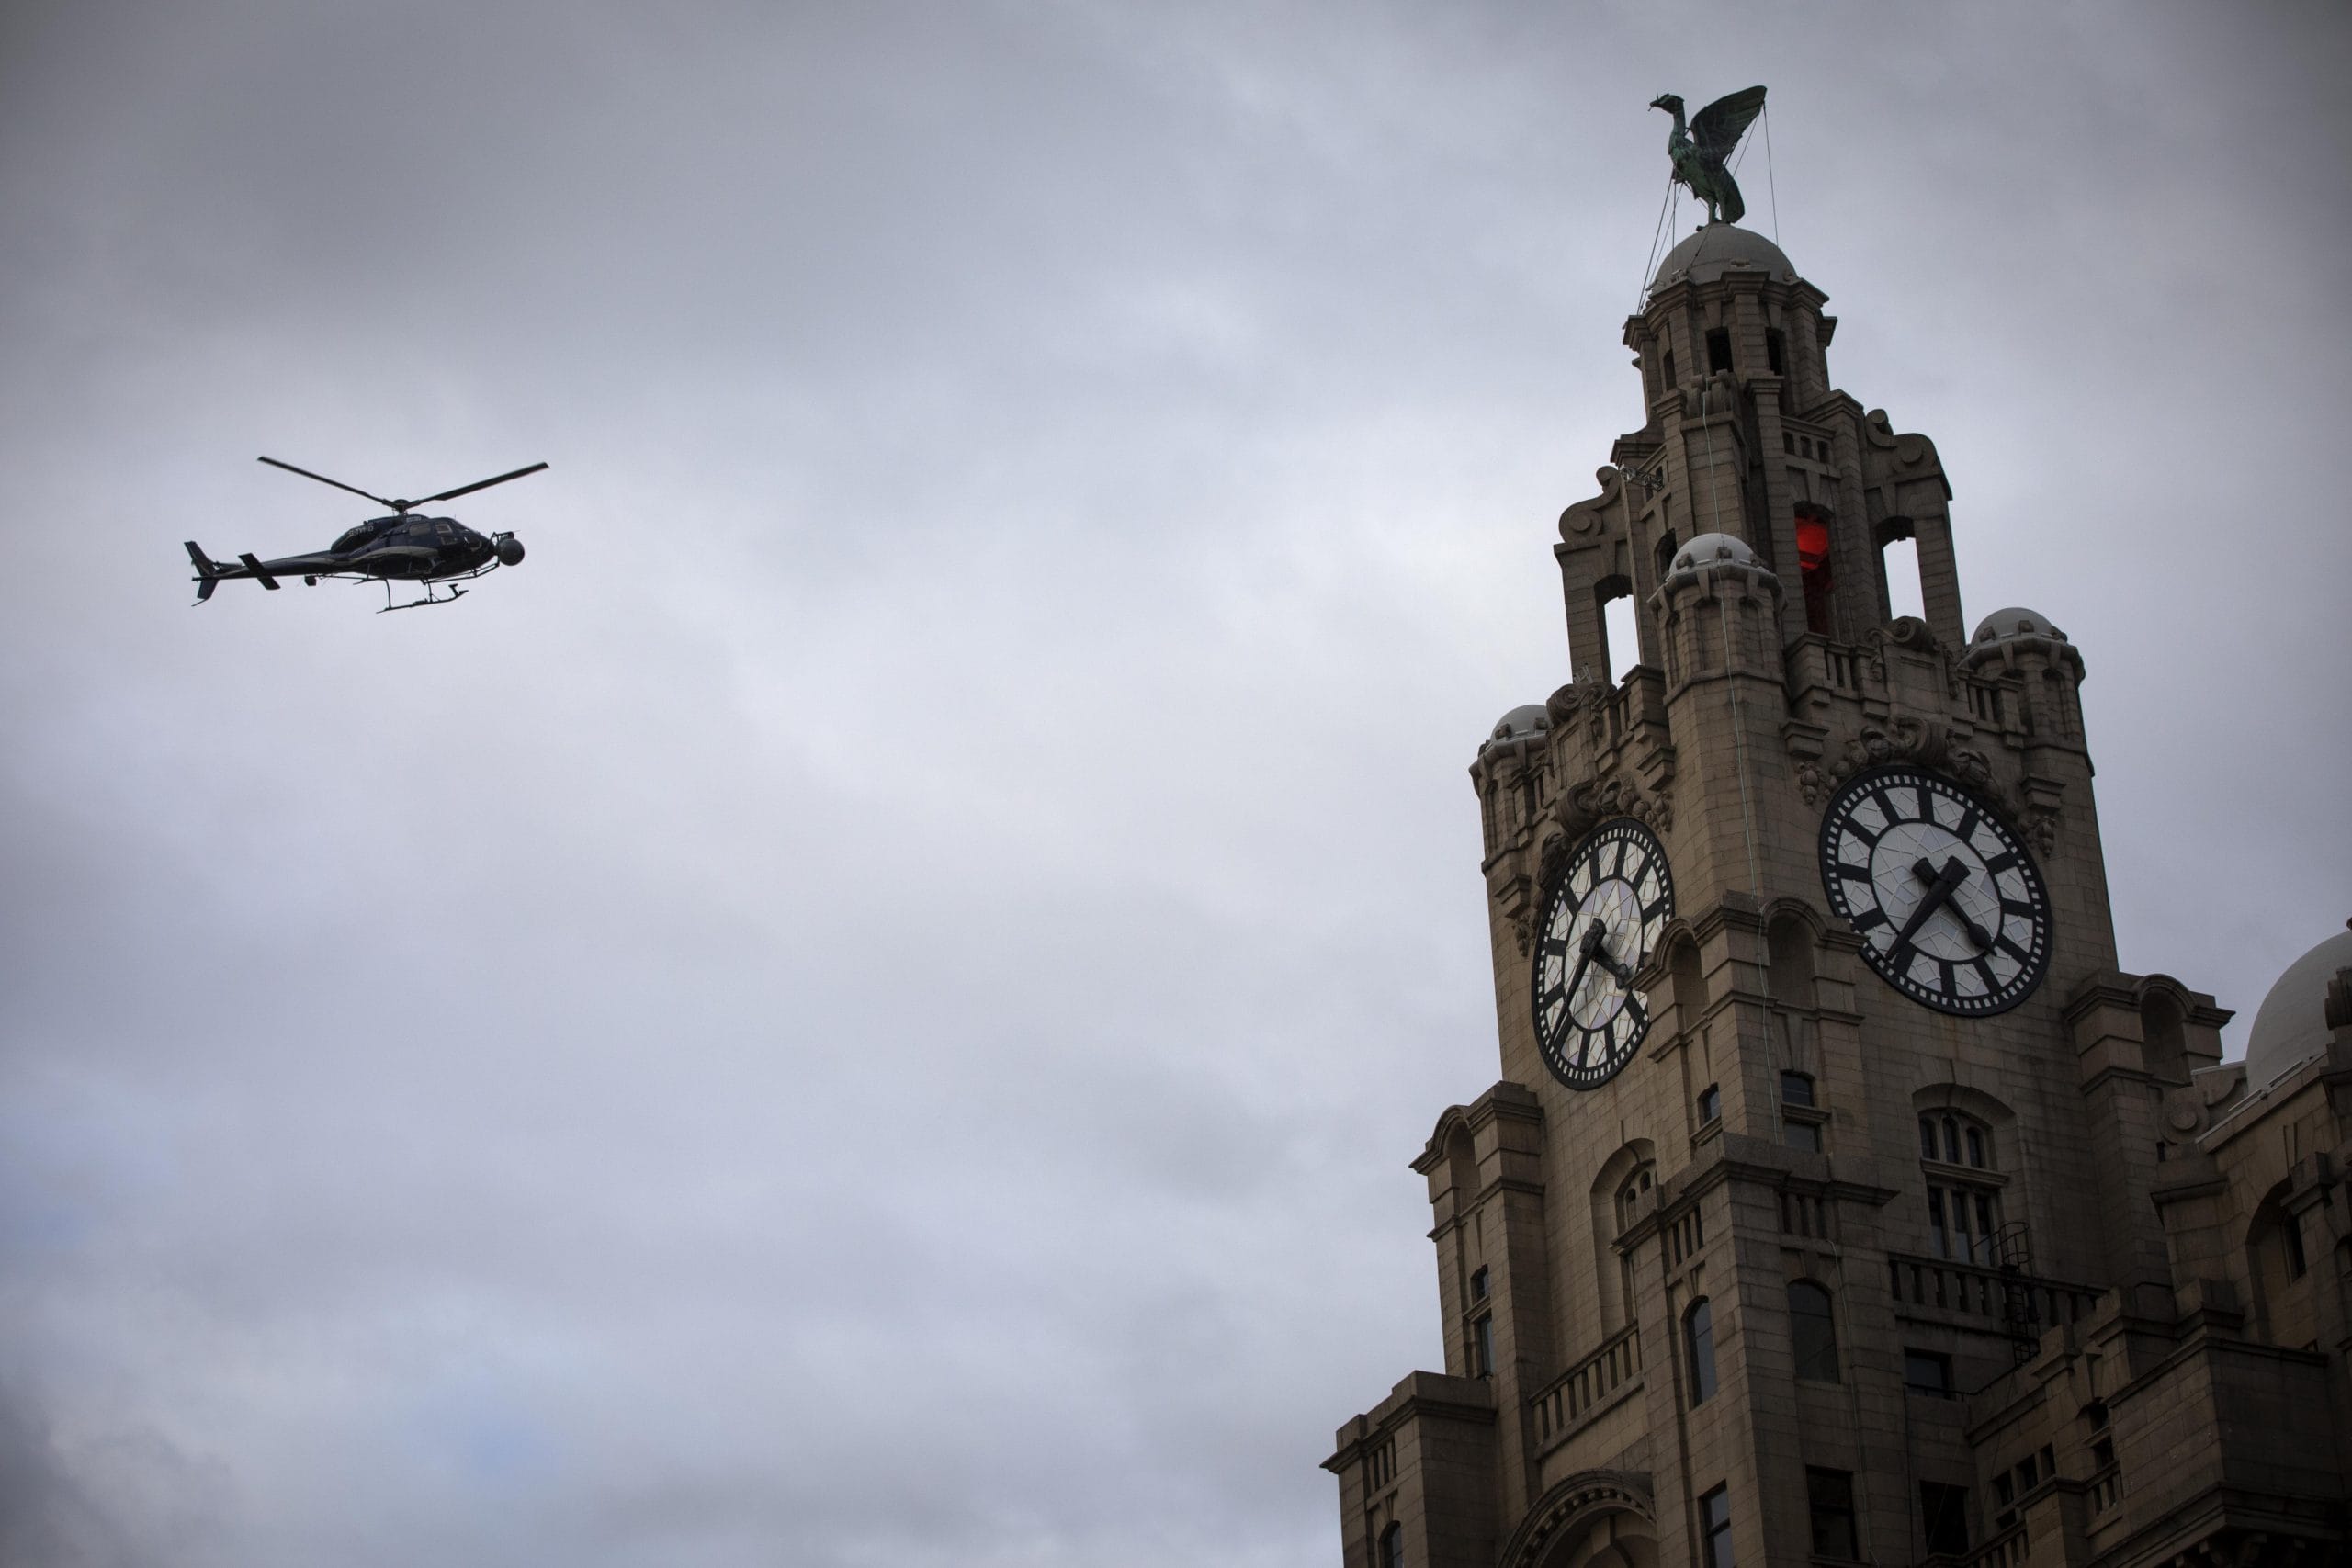 The top of the Liver Building